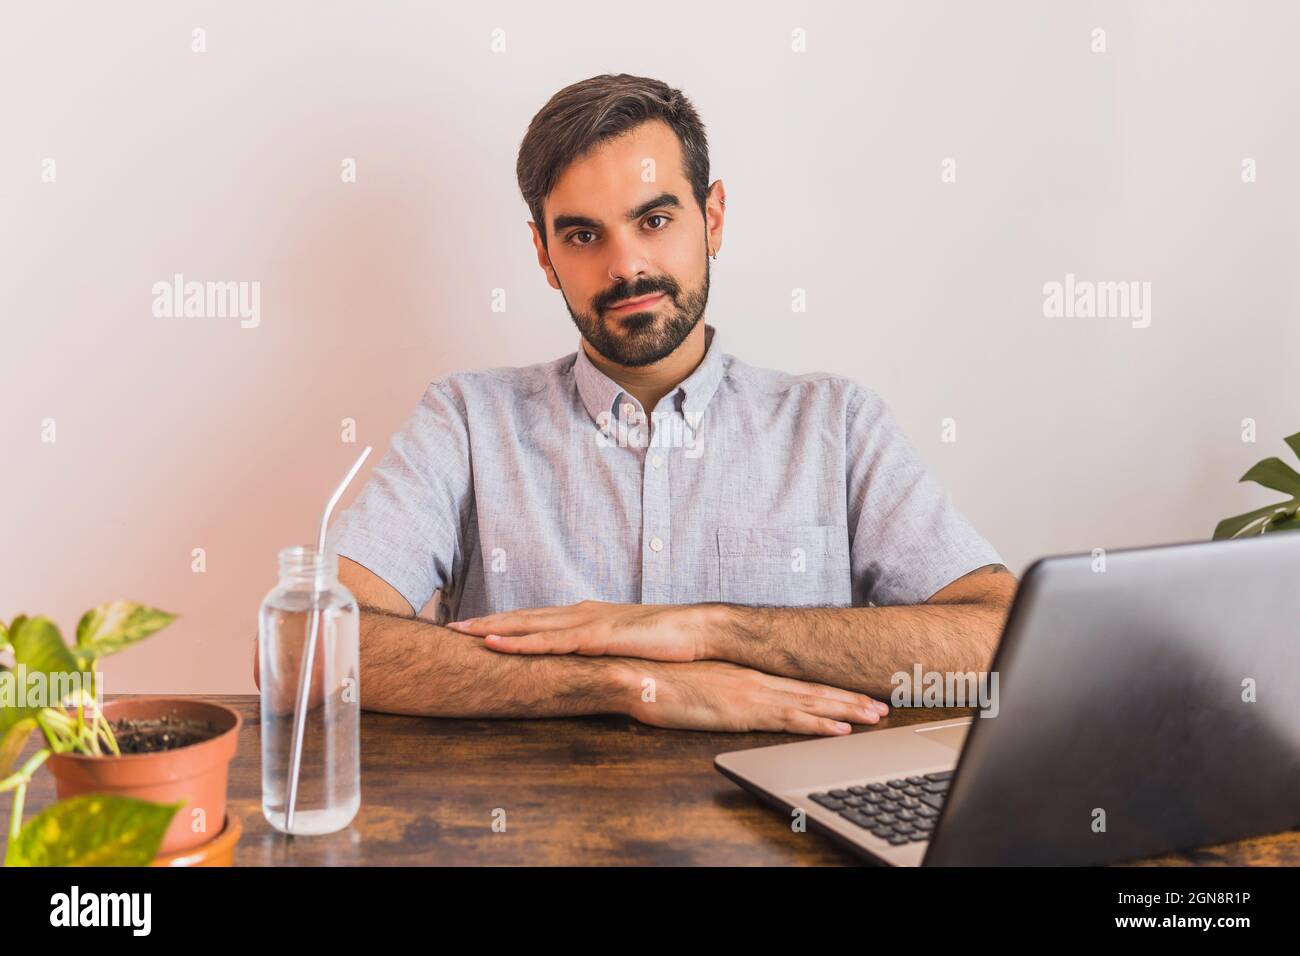 Man sitting with laptop and water bottle at desk Stock Photo